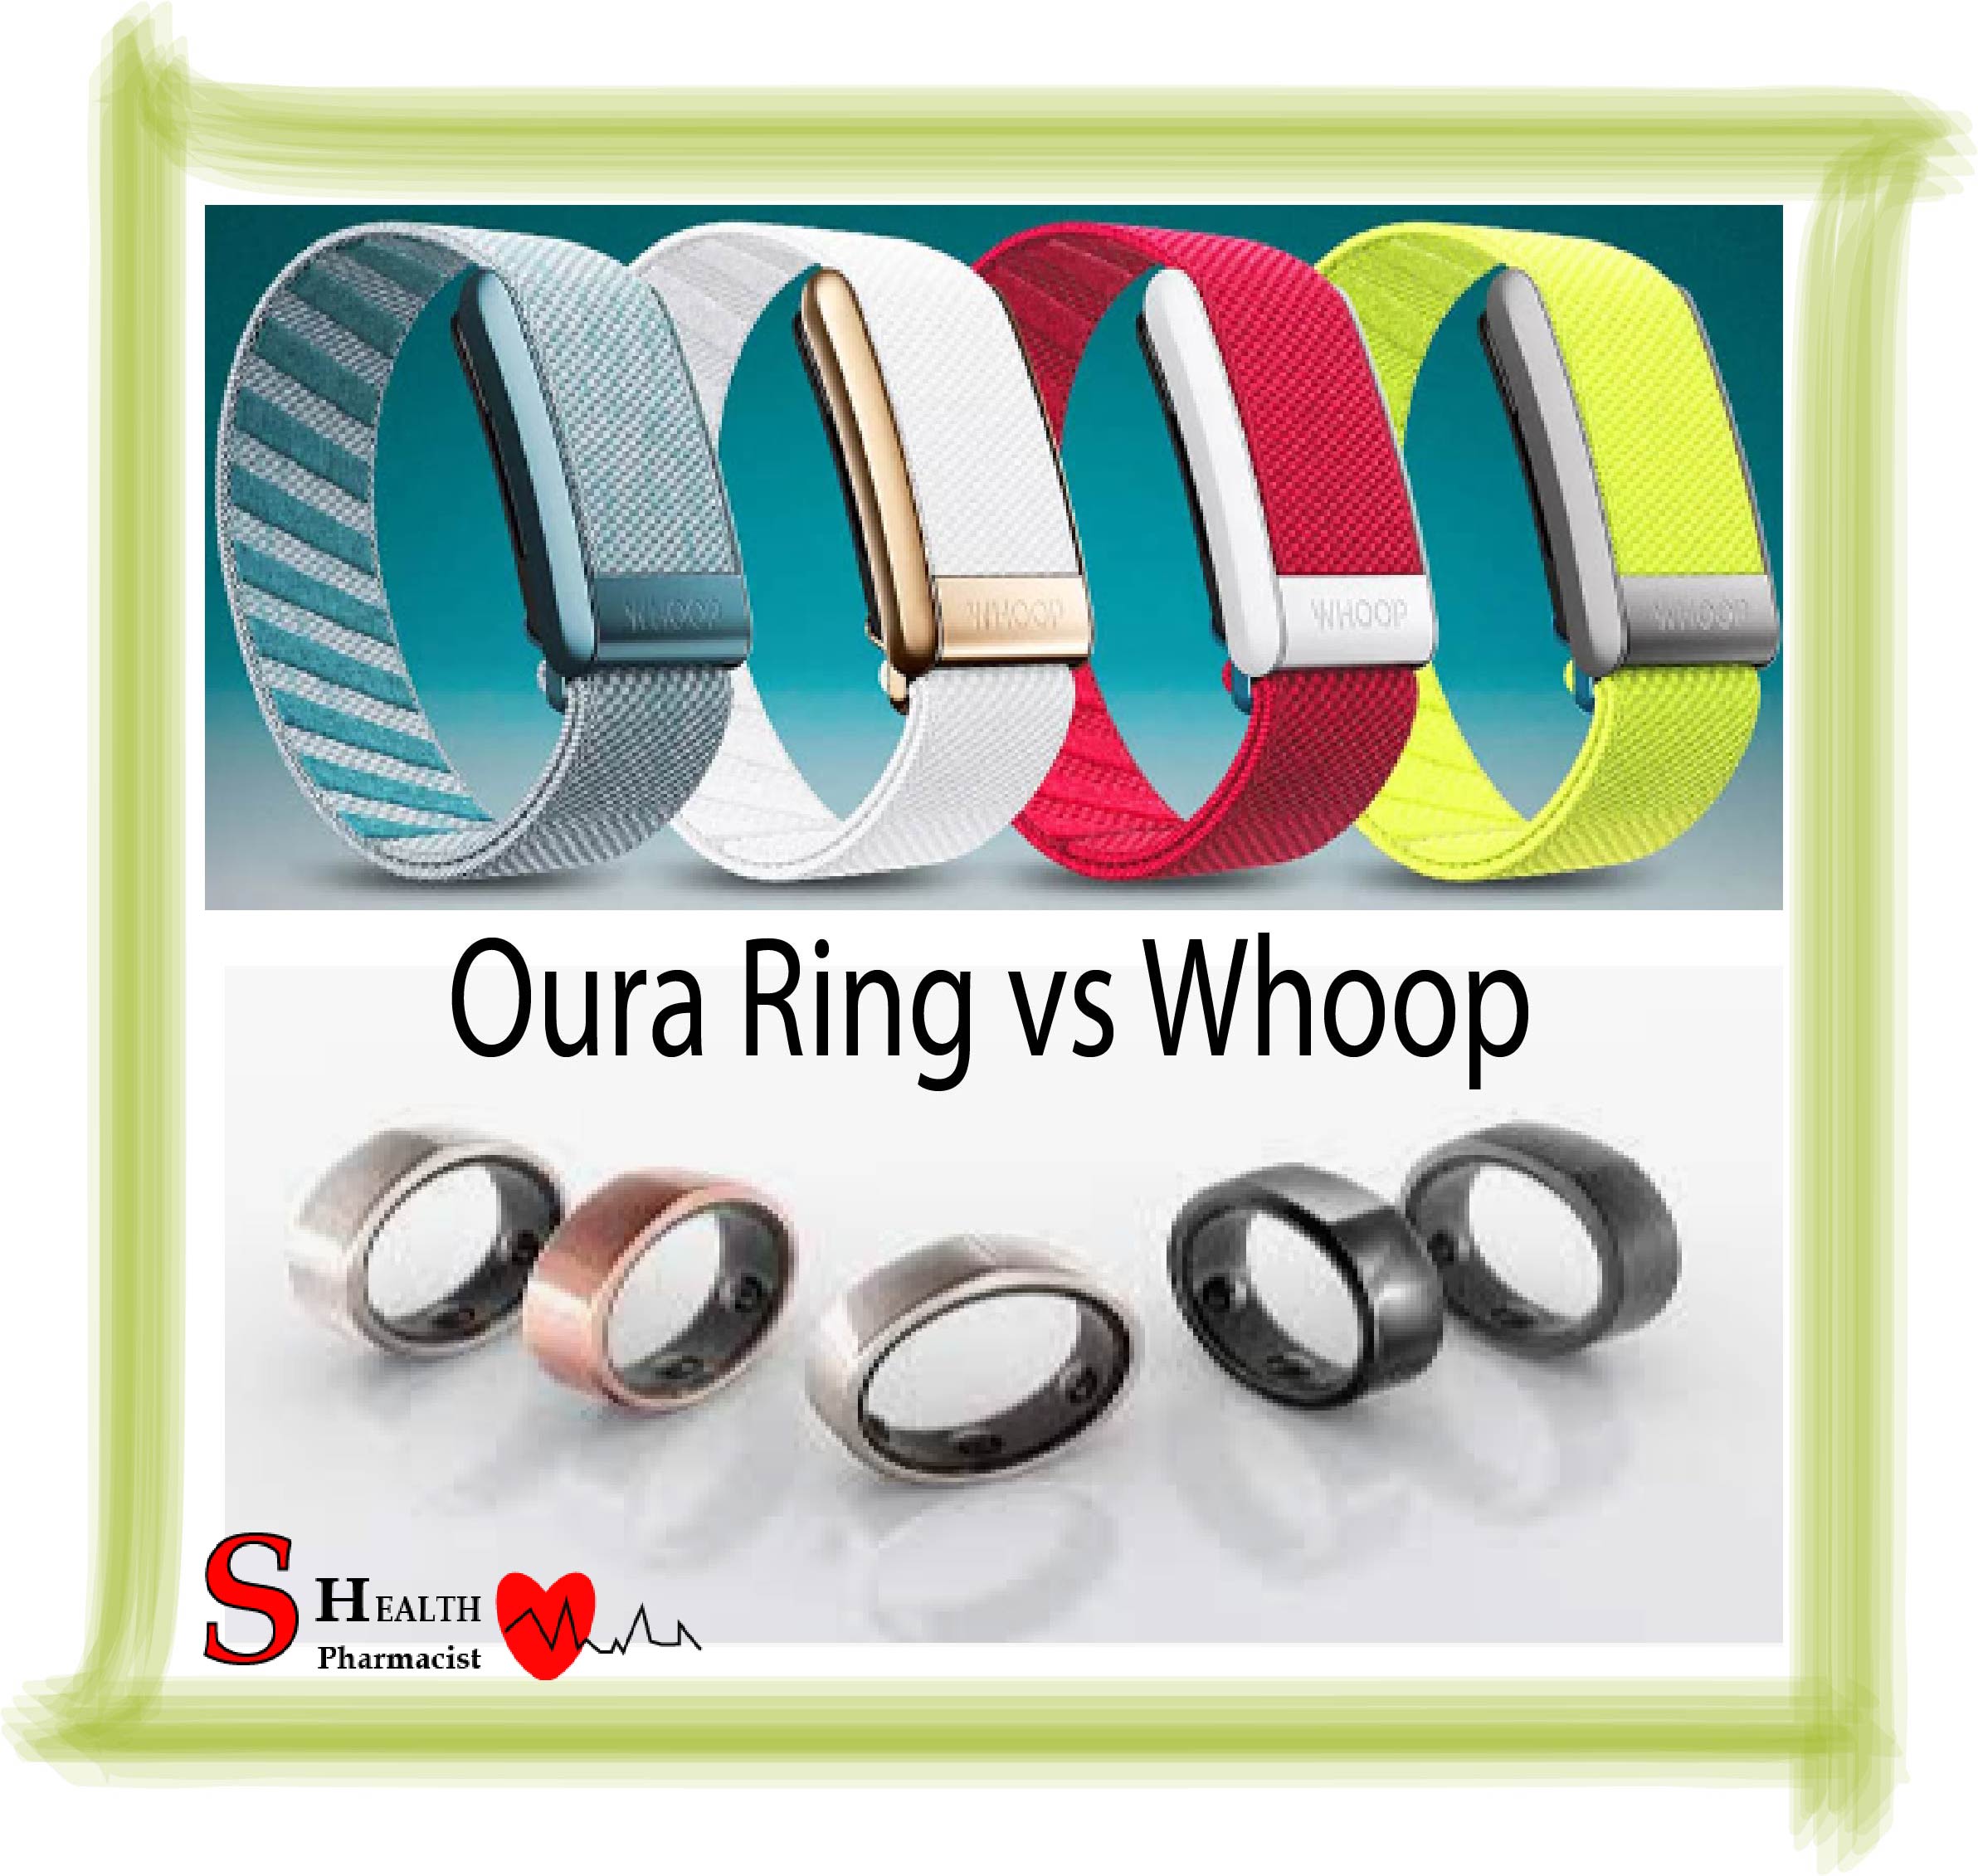 Oura Ring vs Whoop. What is Better Whoop or Oura?